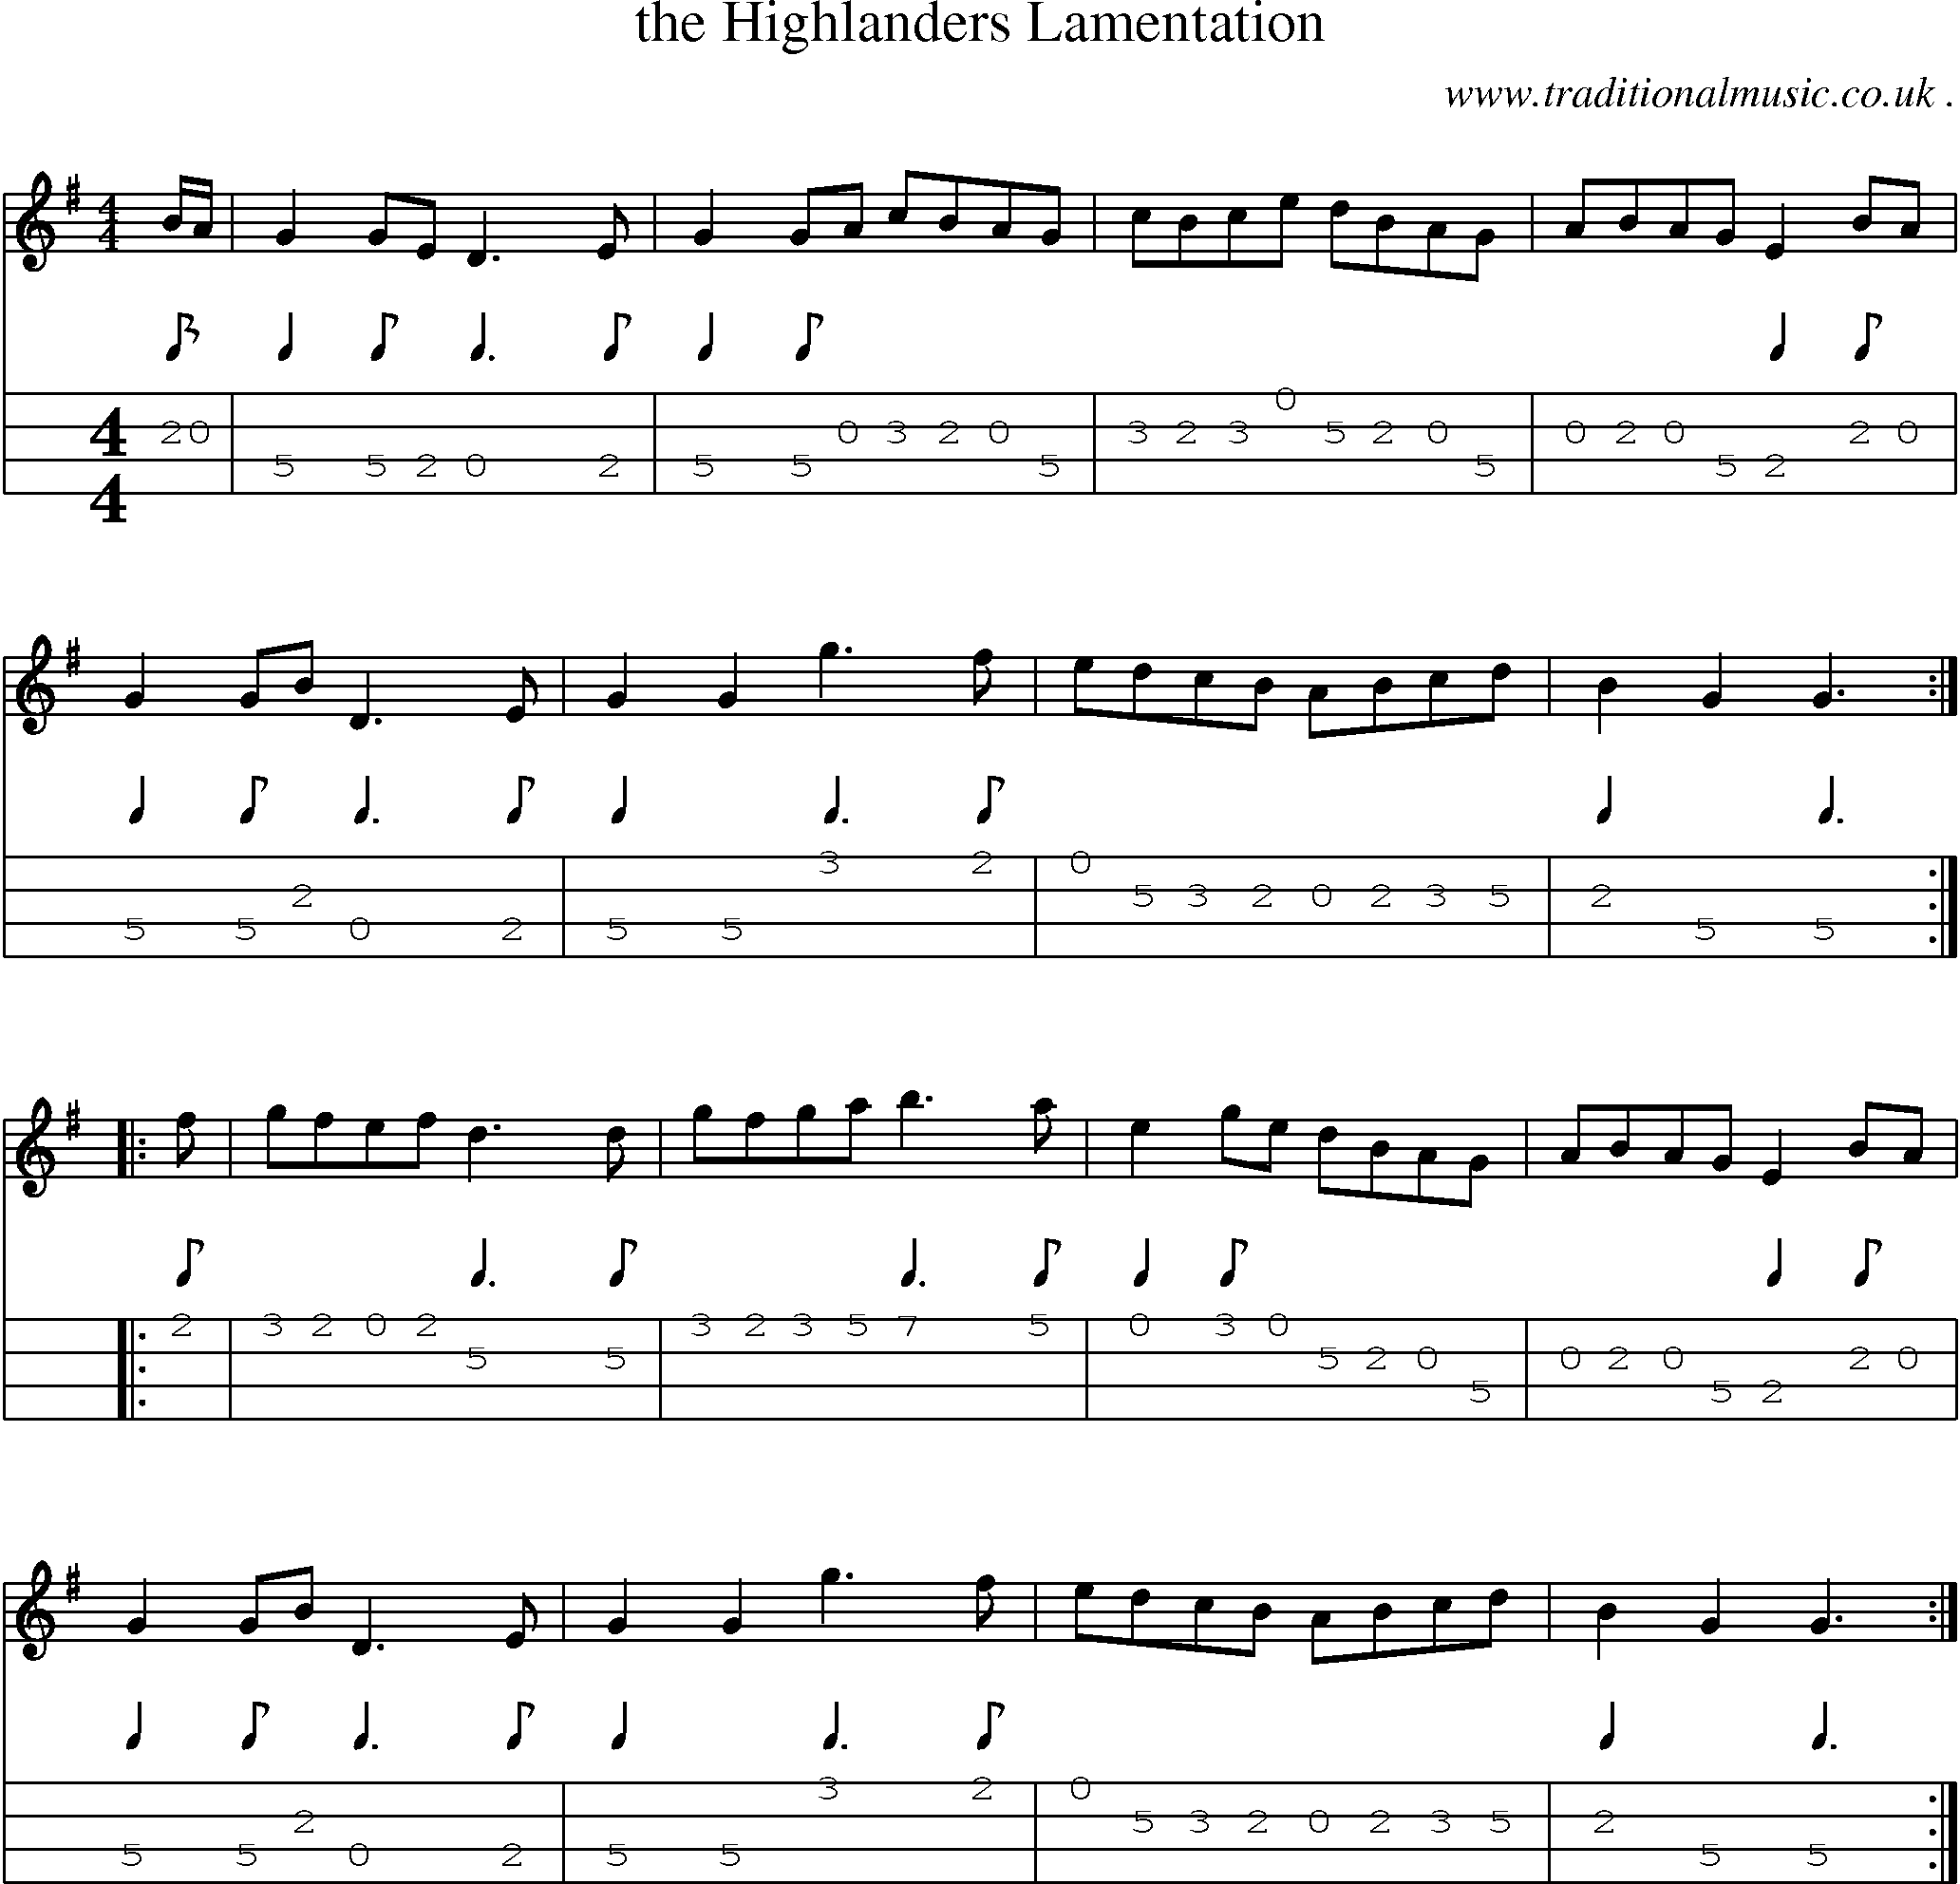 Sheet-Music and Mandolin Tabs for The Highlanders Lamentation